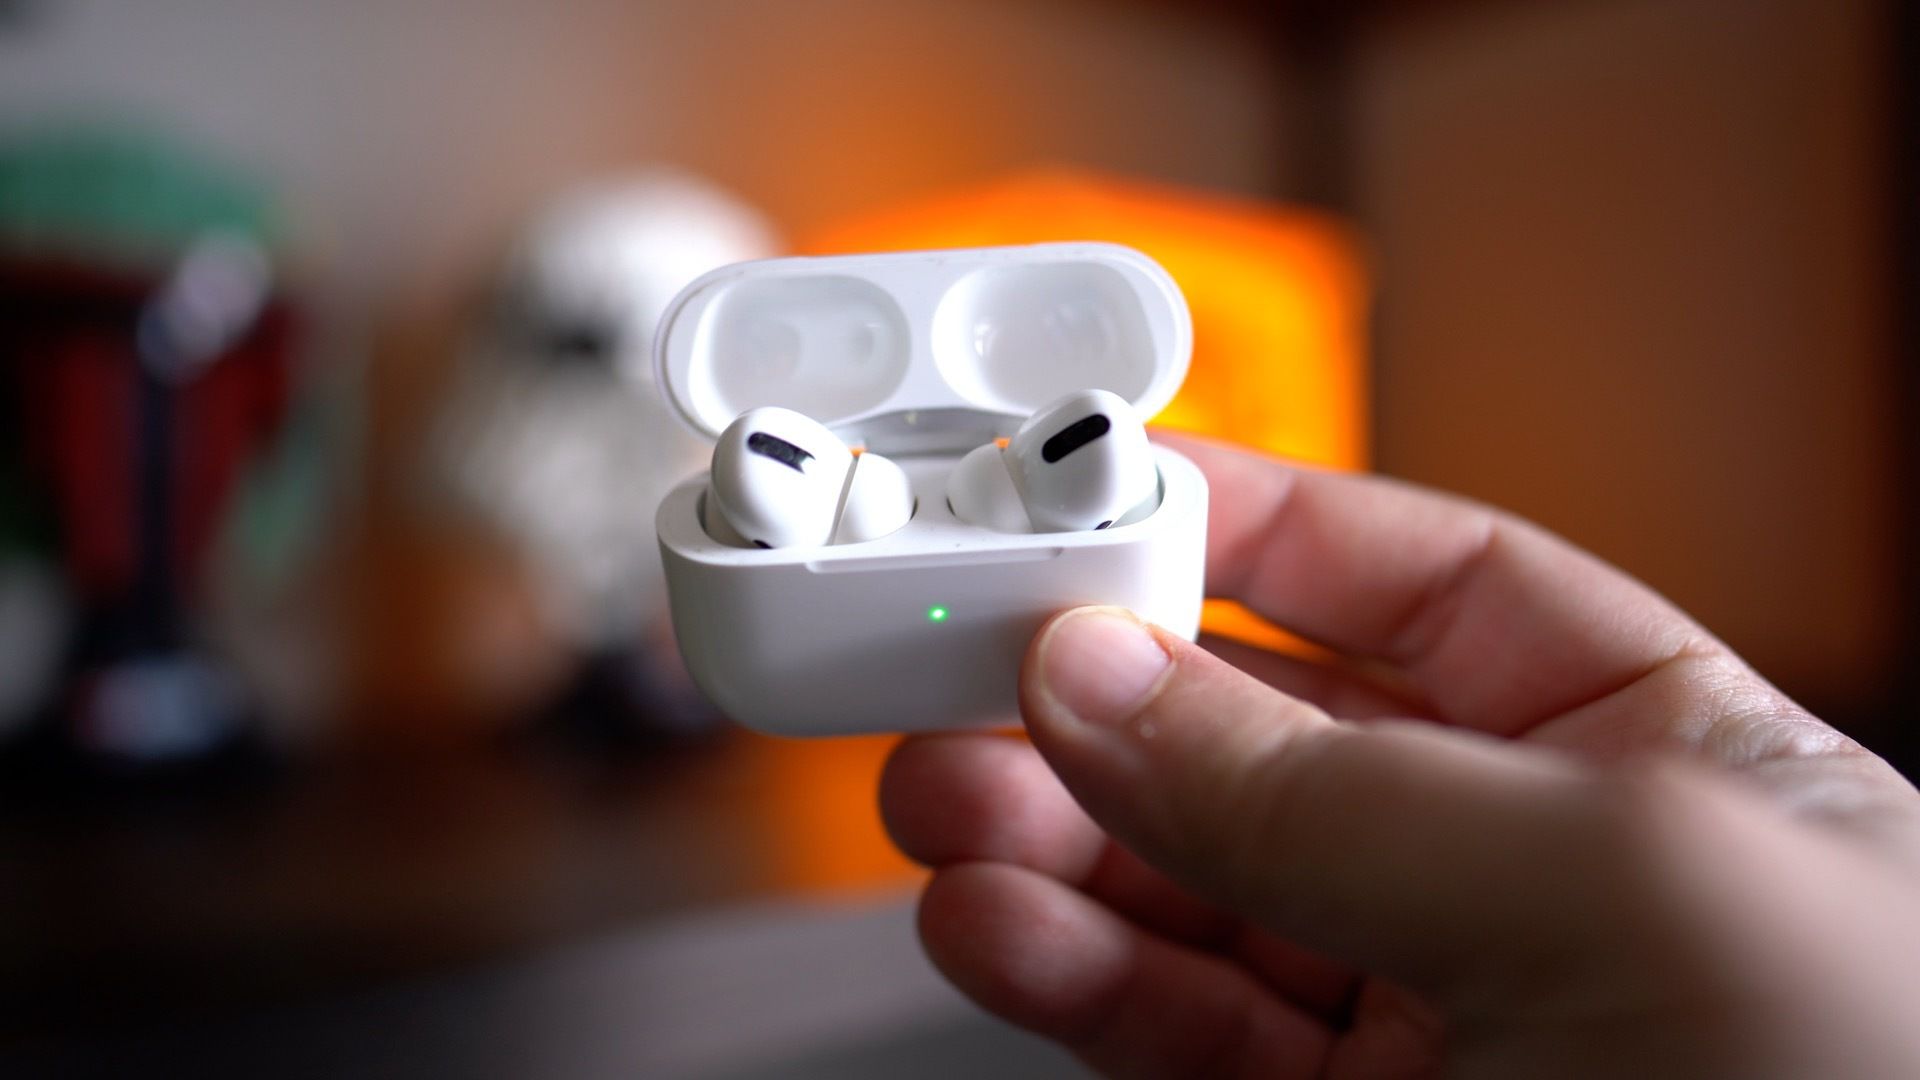 airpods pro rtings